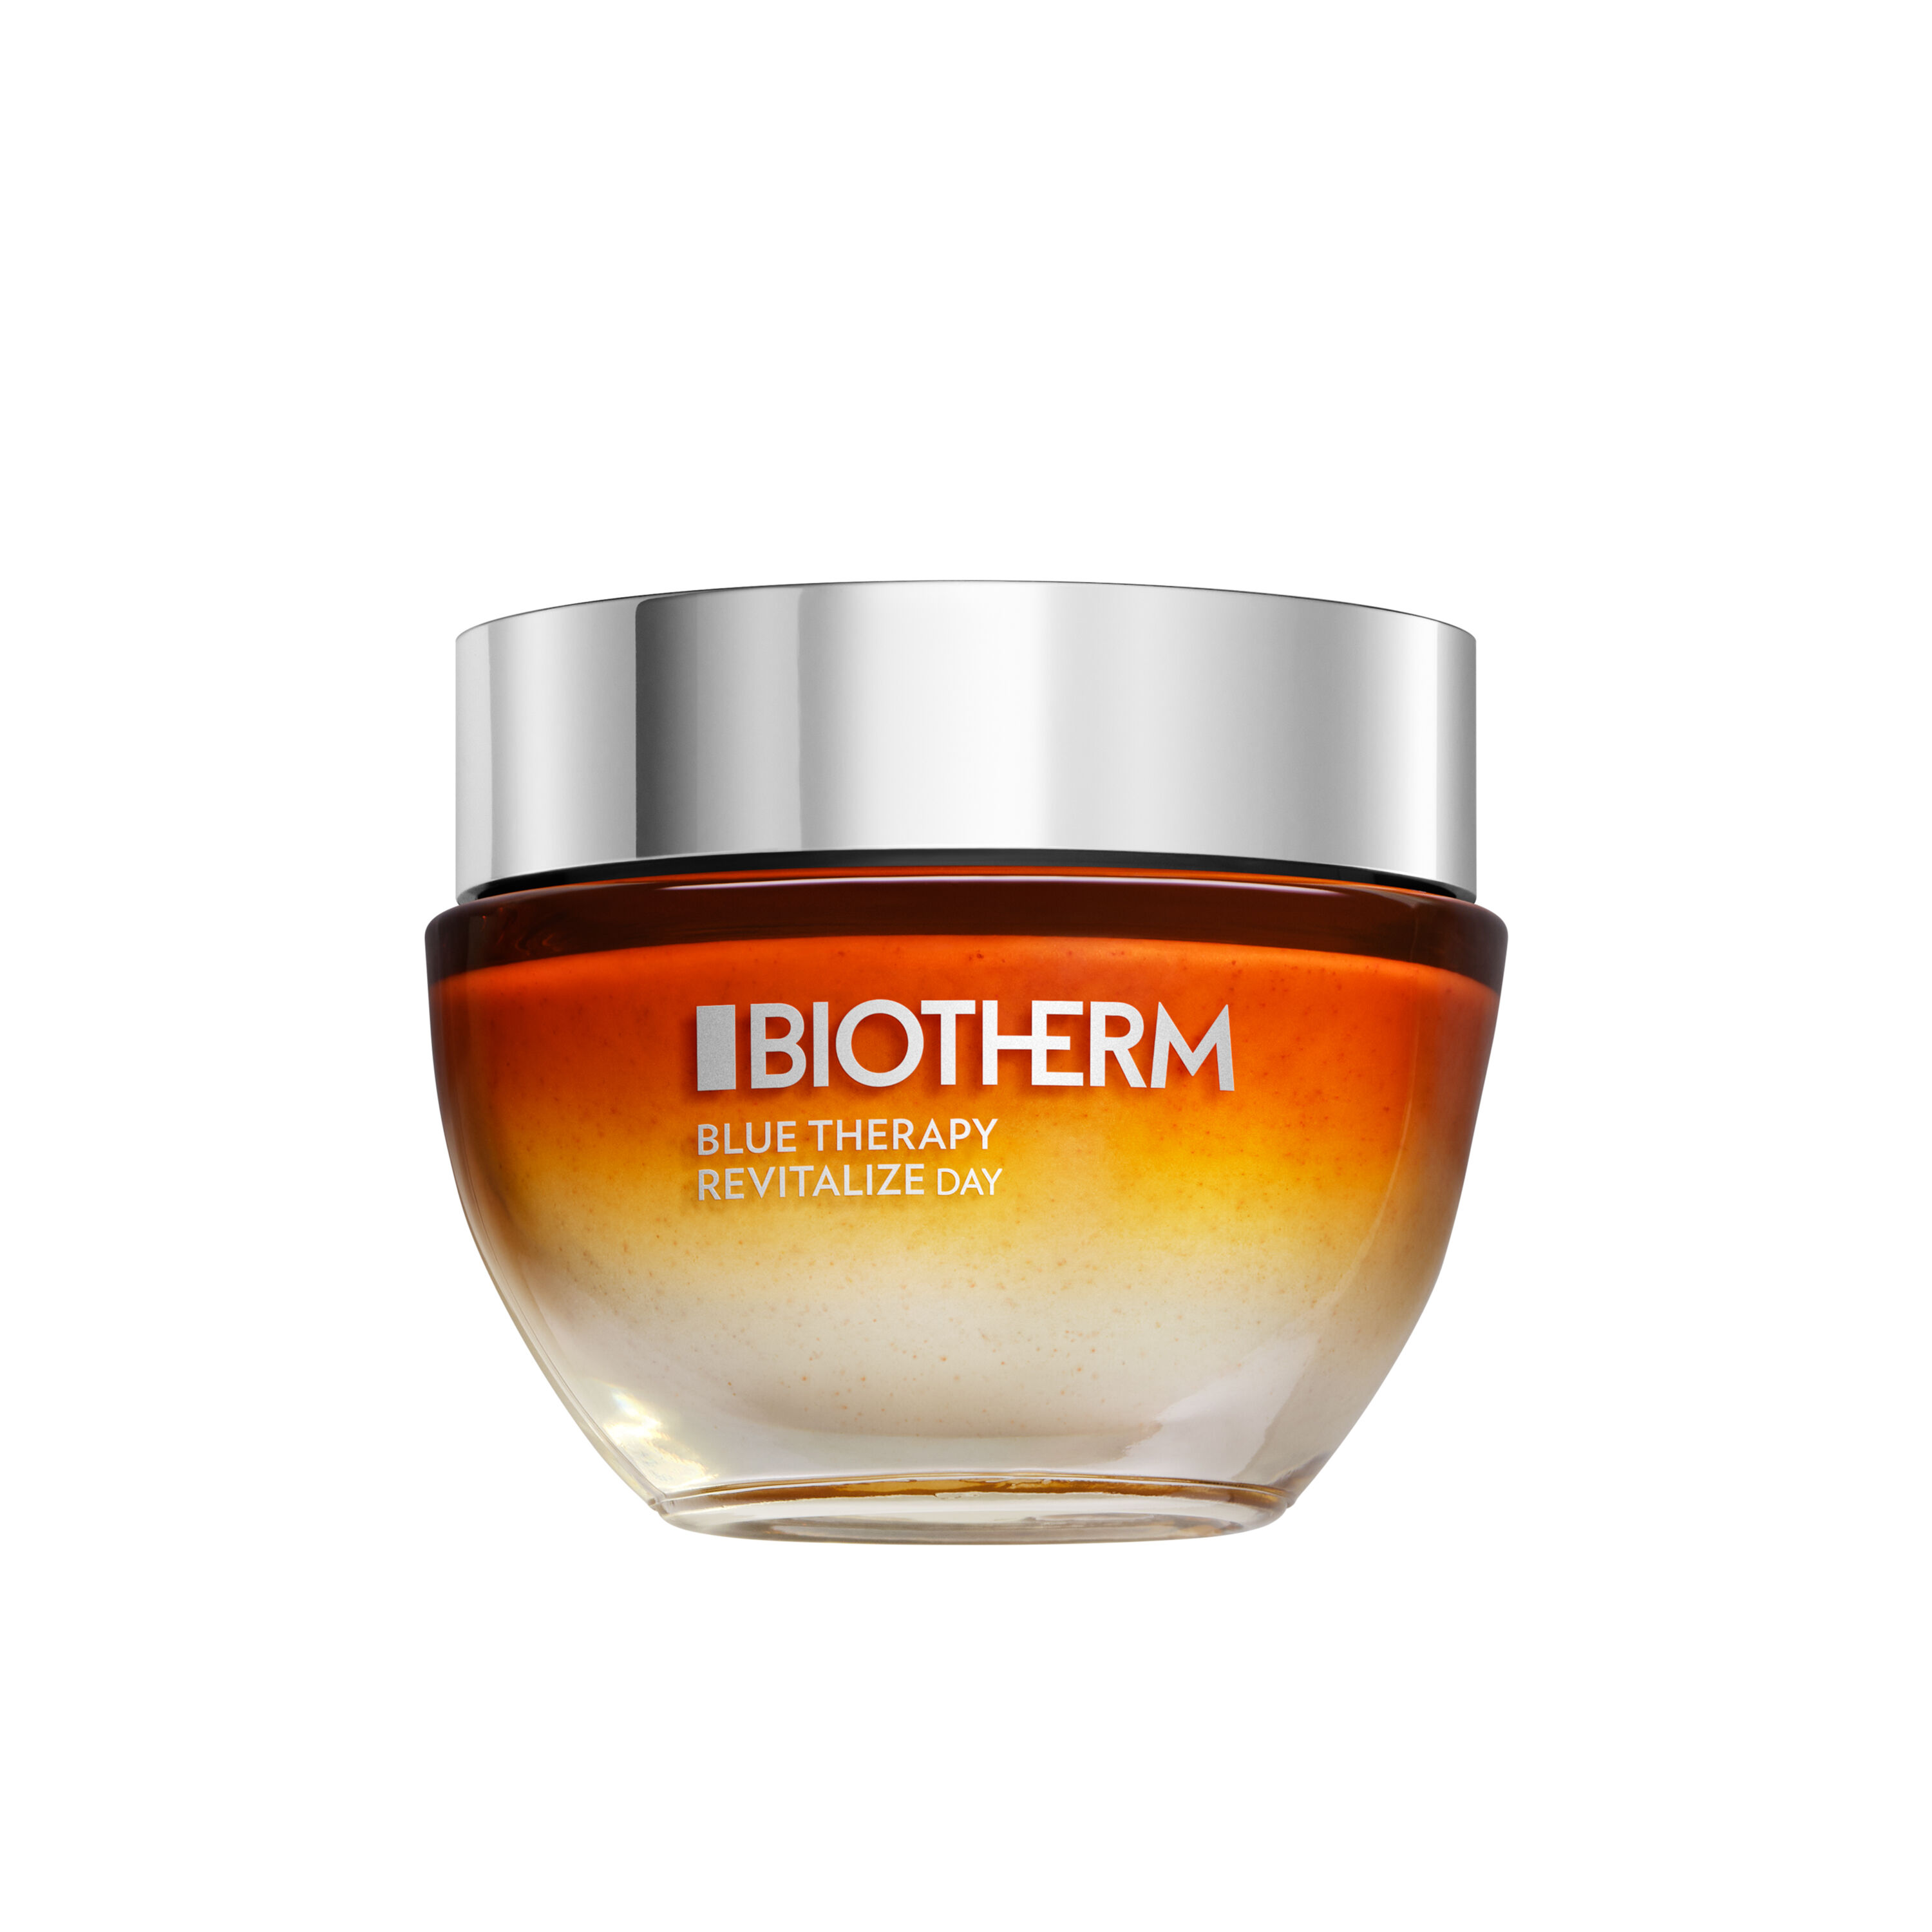 Blue Anti-Aging Cream All Day Skin Biotherm for Revitalize | Type Therapy